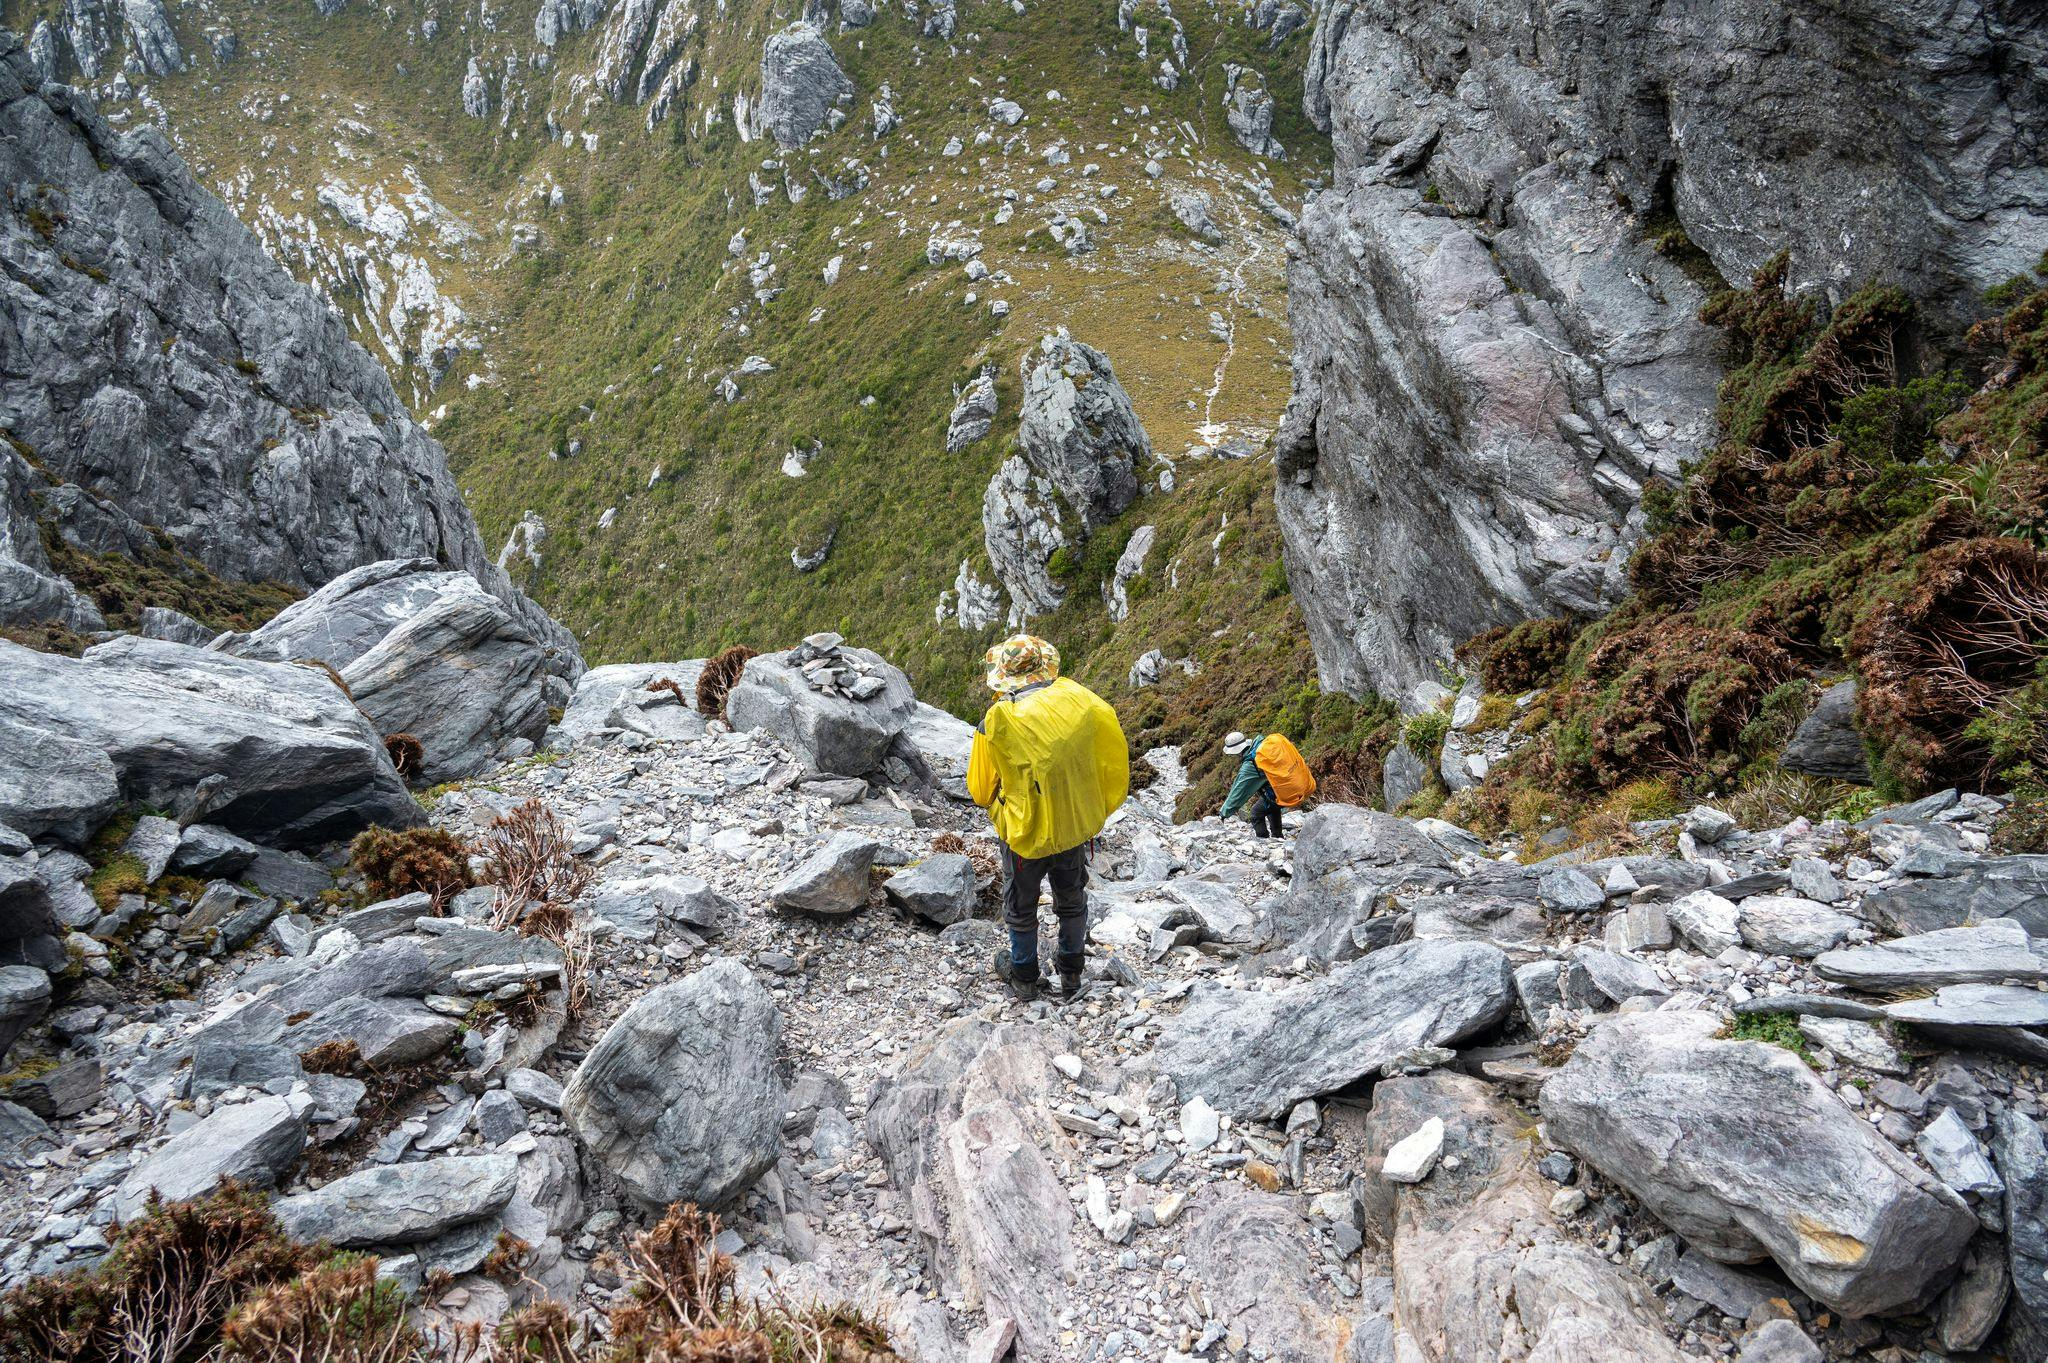 Descending Mt Pegasus. Crumbly scree and steep descents were a theme of the trip. Photo Credit - Craig Pearce